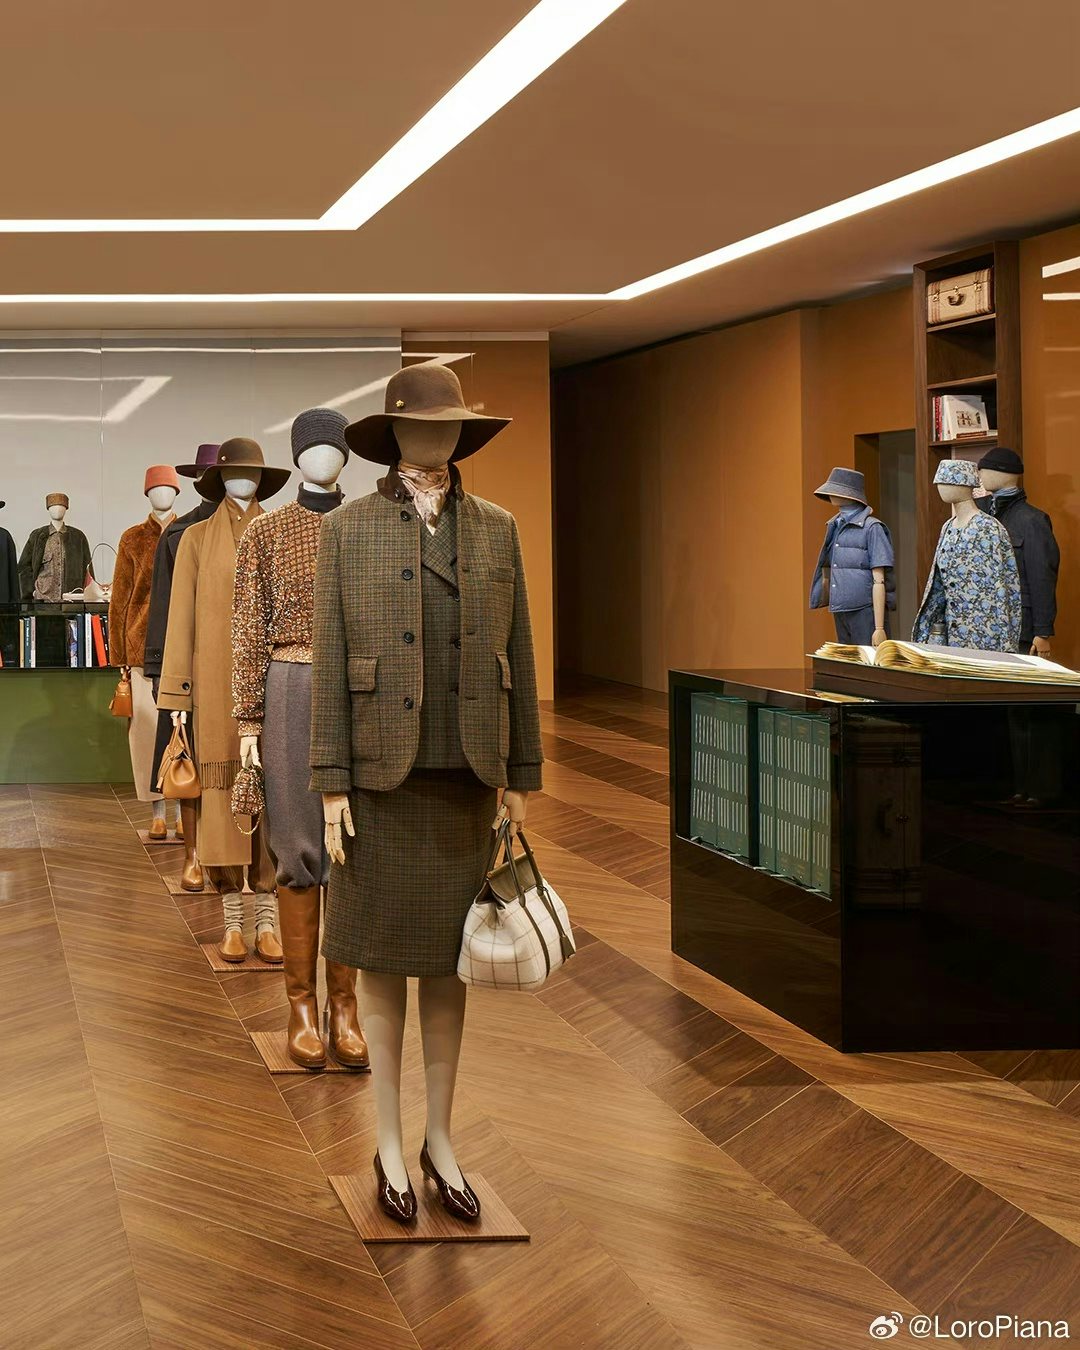 Scarcity-focused brands like Loro Piana benefit from the growing number of HNWIs in China. Image: Loro Piana